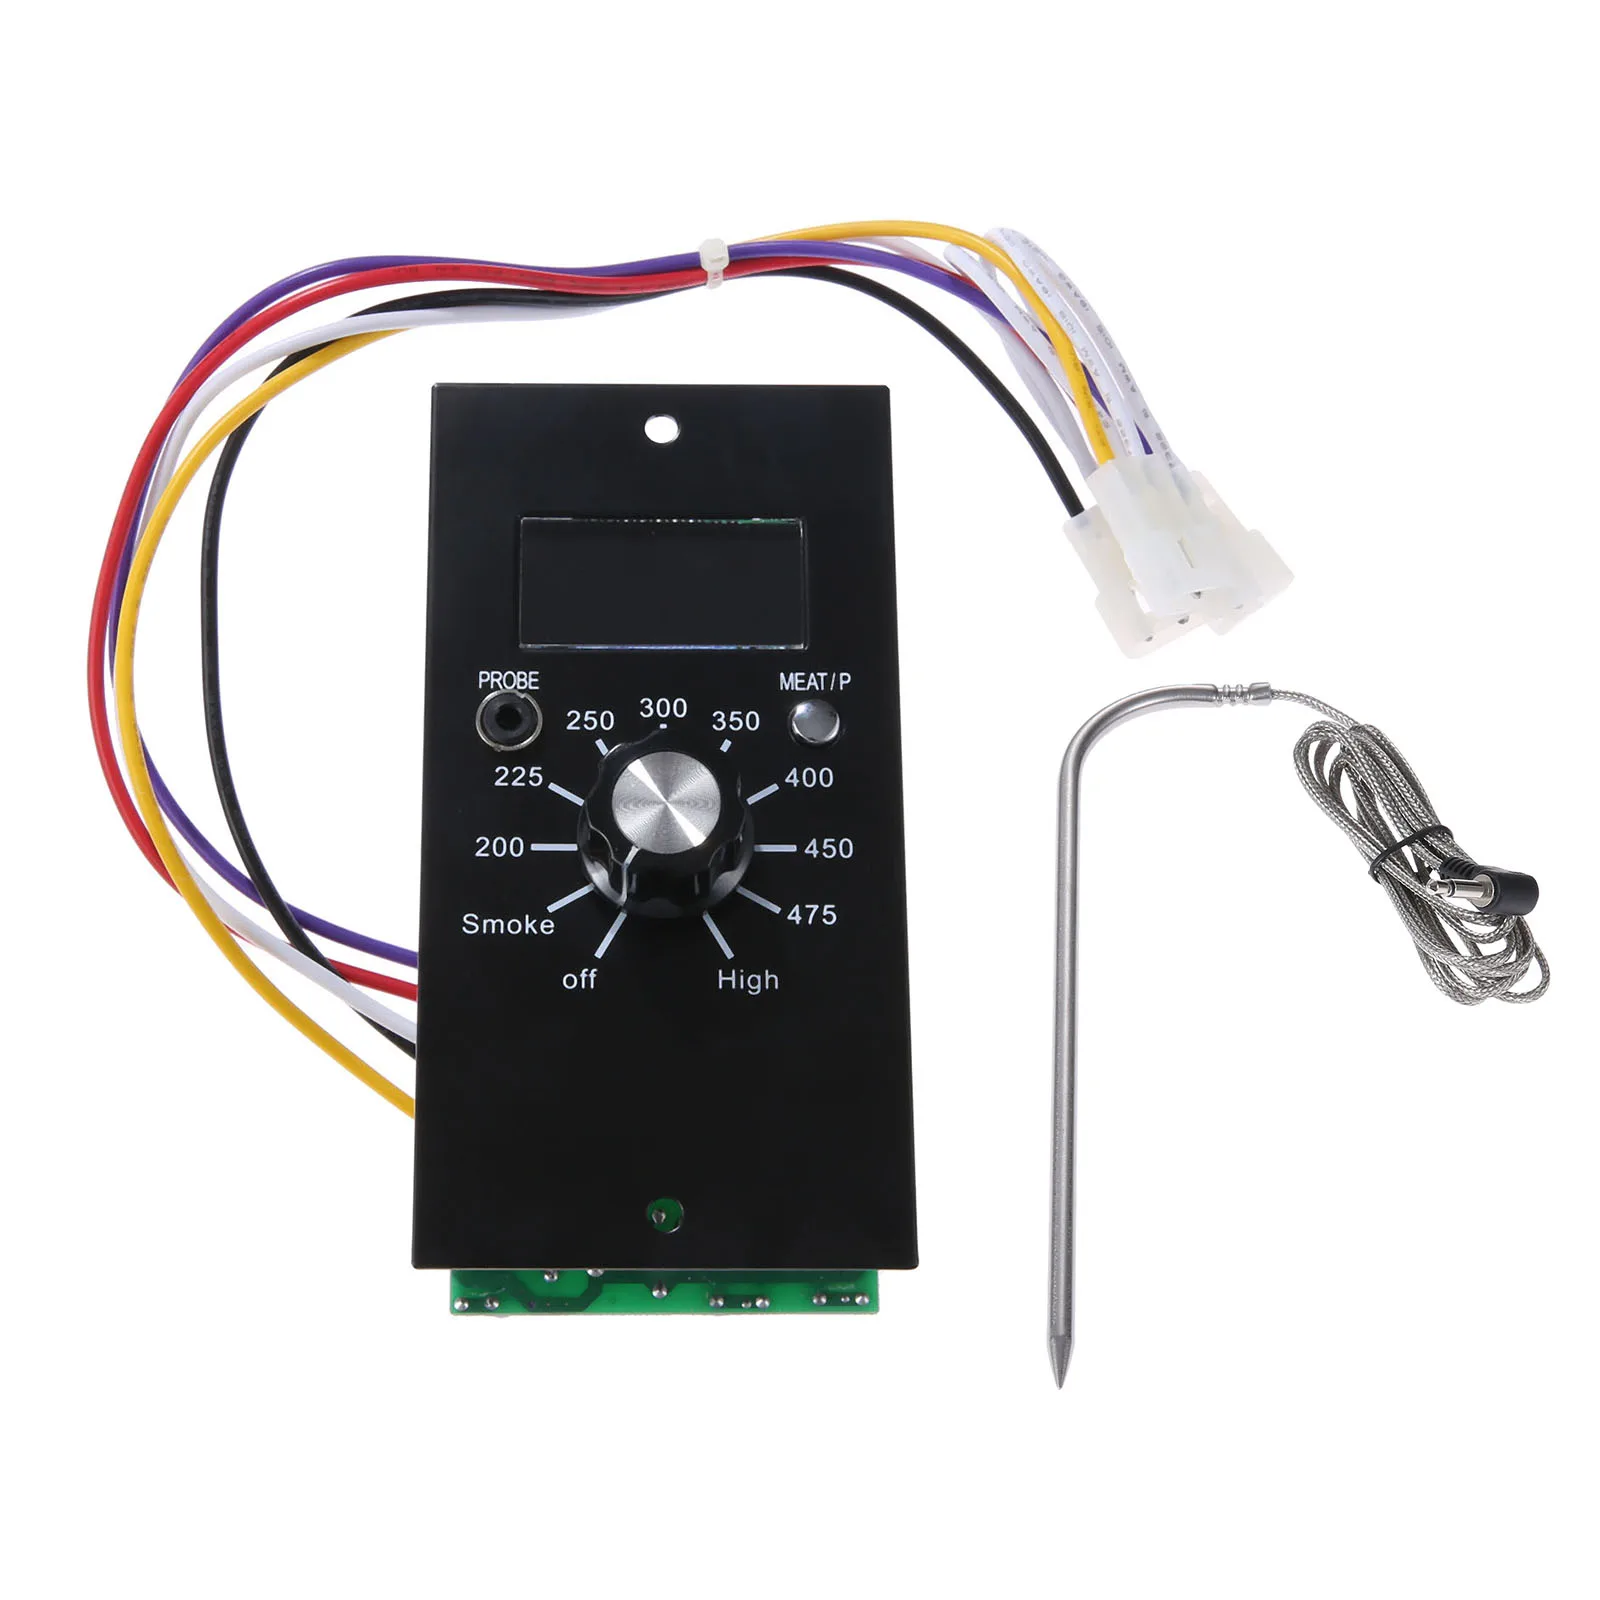 DIGITAL THERMOSTAT UPGRADE CONTROLLER FOR PIT BOSS WITH P SETTING AND PROBES   3 